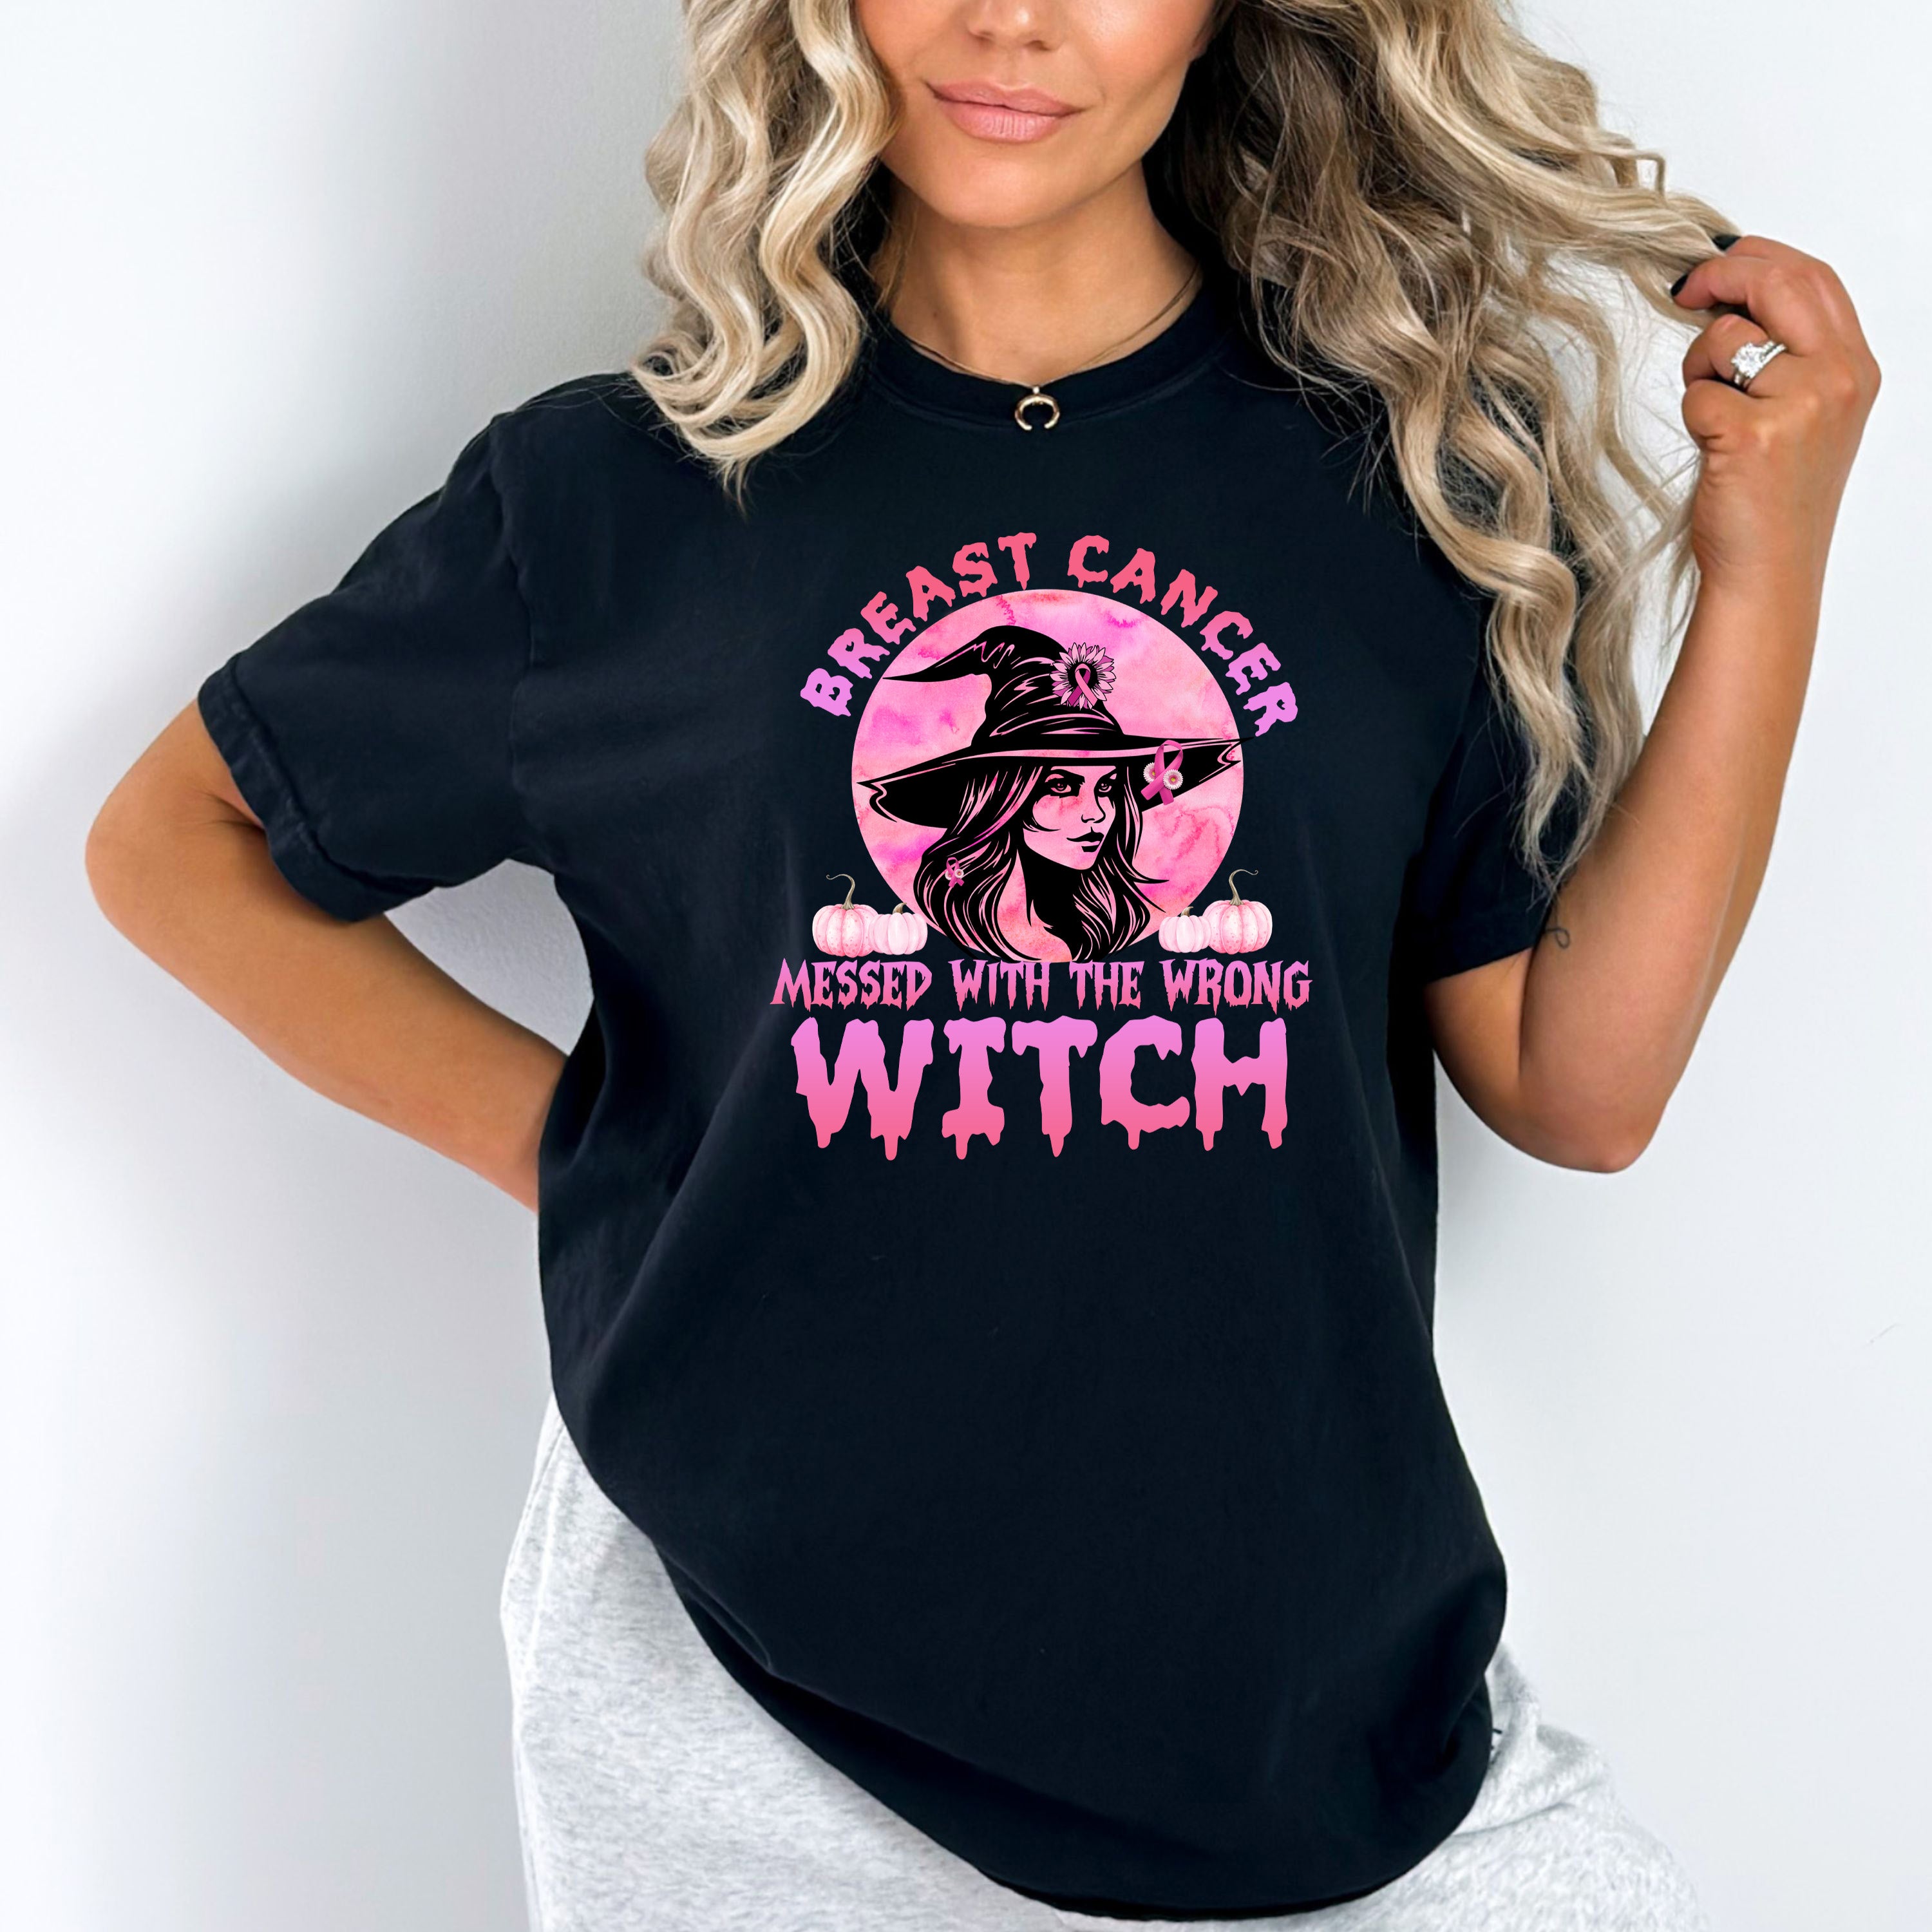 Messed With The Wrong Witch - Bella Canvas